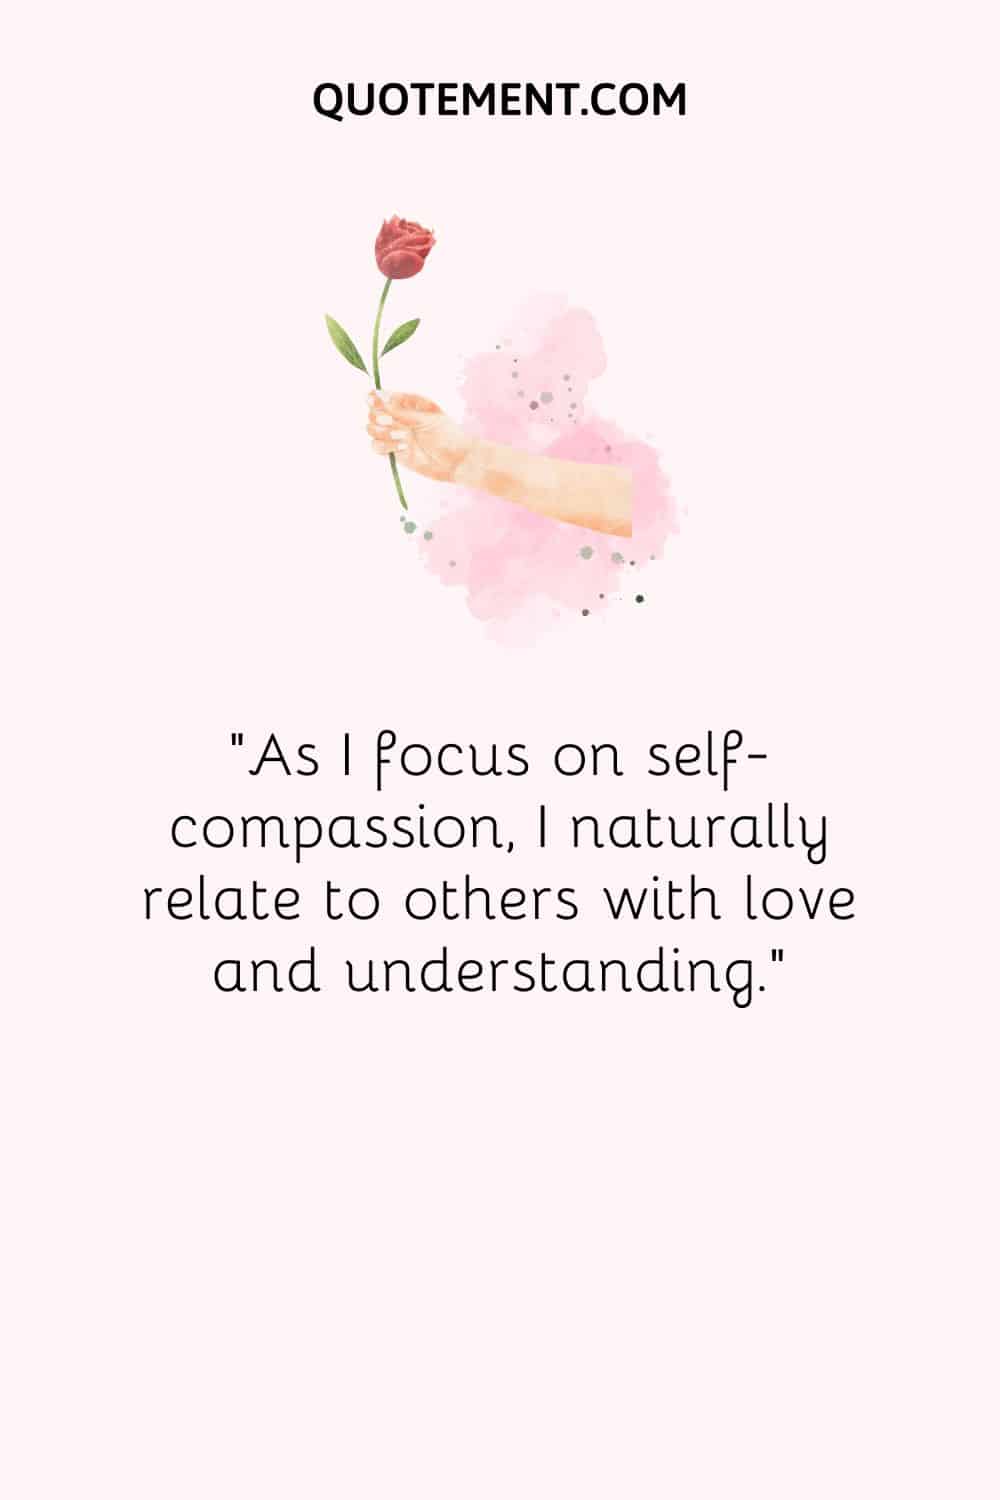 As I focus on self-compassion, I naturally relate to others with love and understanding